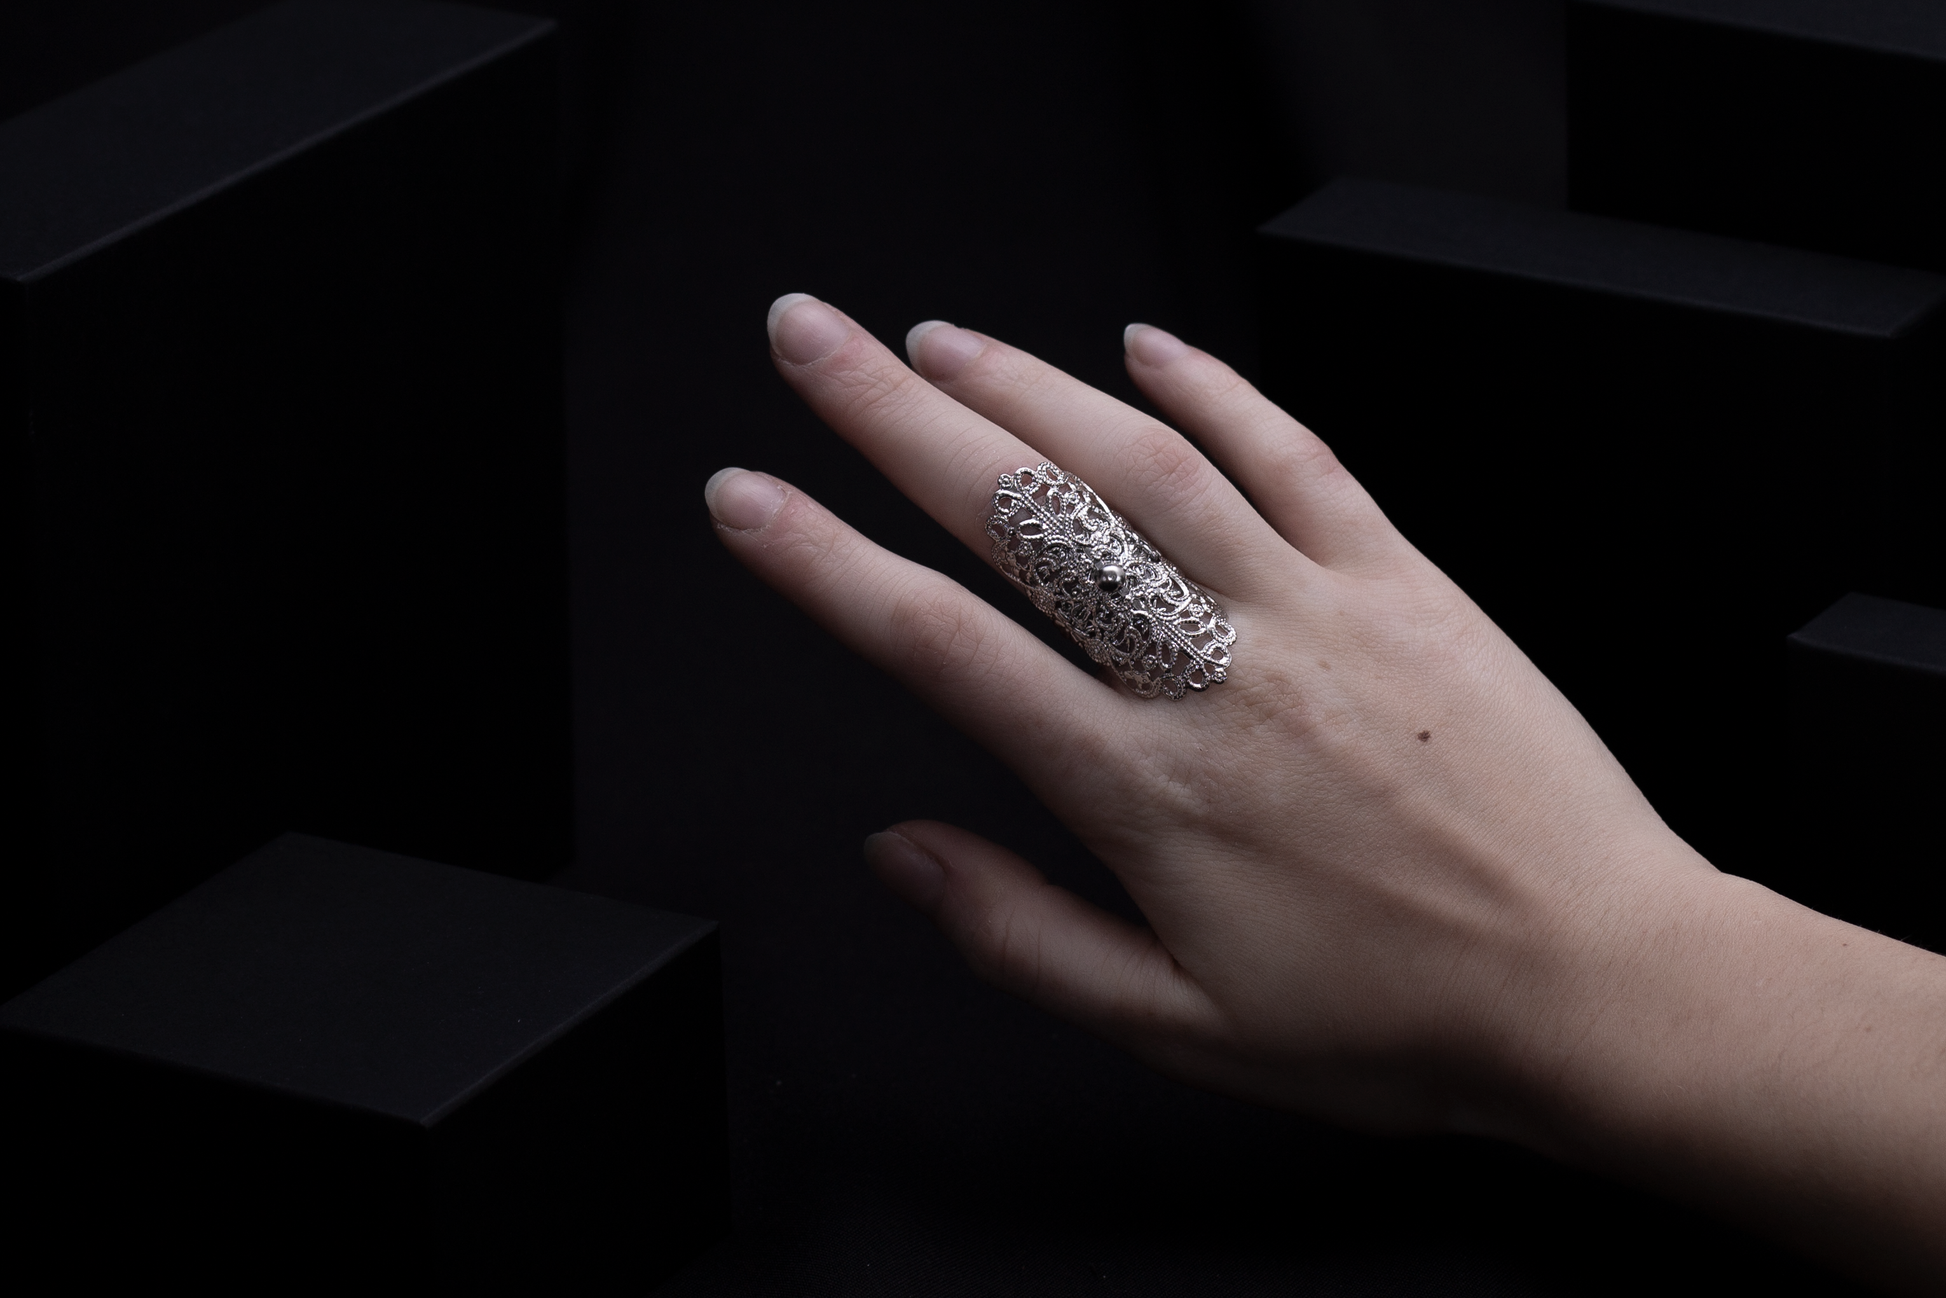 Elegant oval-shaped gothic ring from Myril Jewels, showcasing a detailed filigree design for a sophisticated neo-gothic charm. A statement piece that complements Halloween attire or everyday minimal goth style, perfect for witchcore enthusiasts or as a unique gift for the goth girlfriend